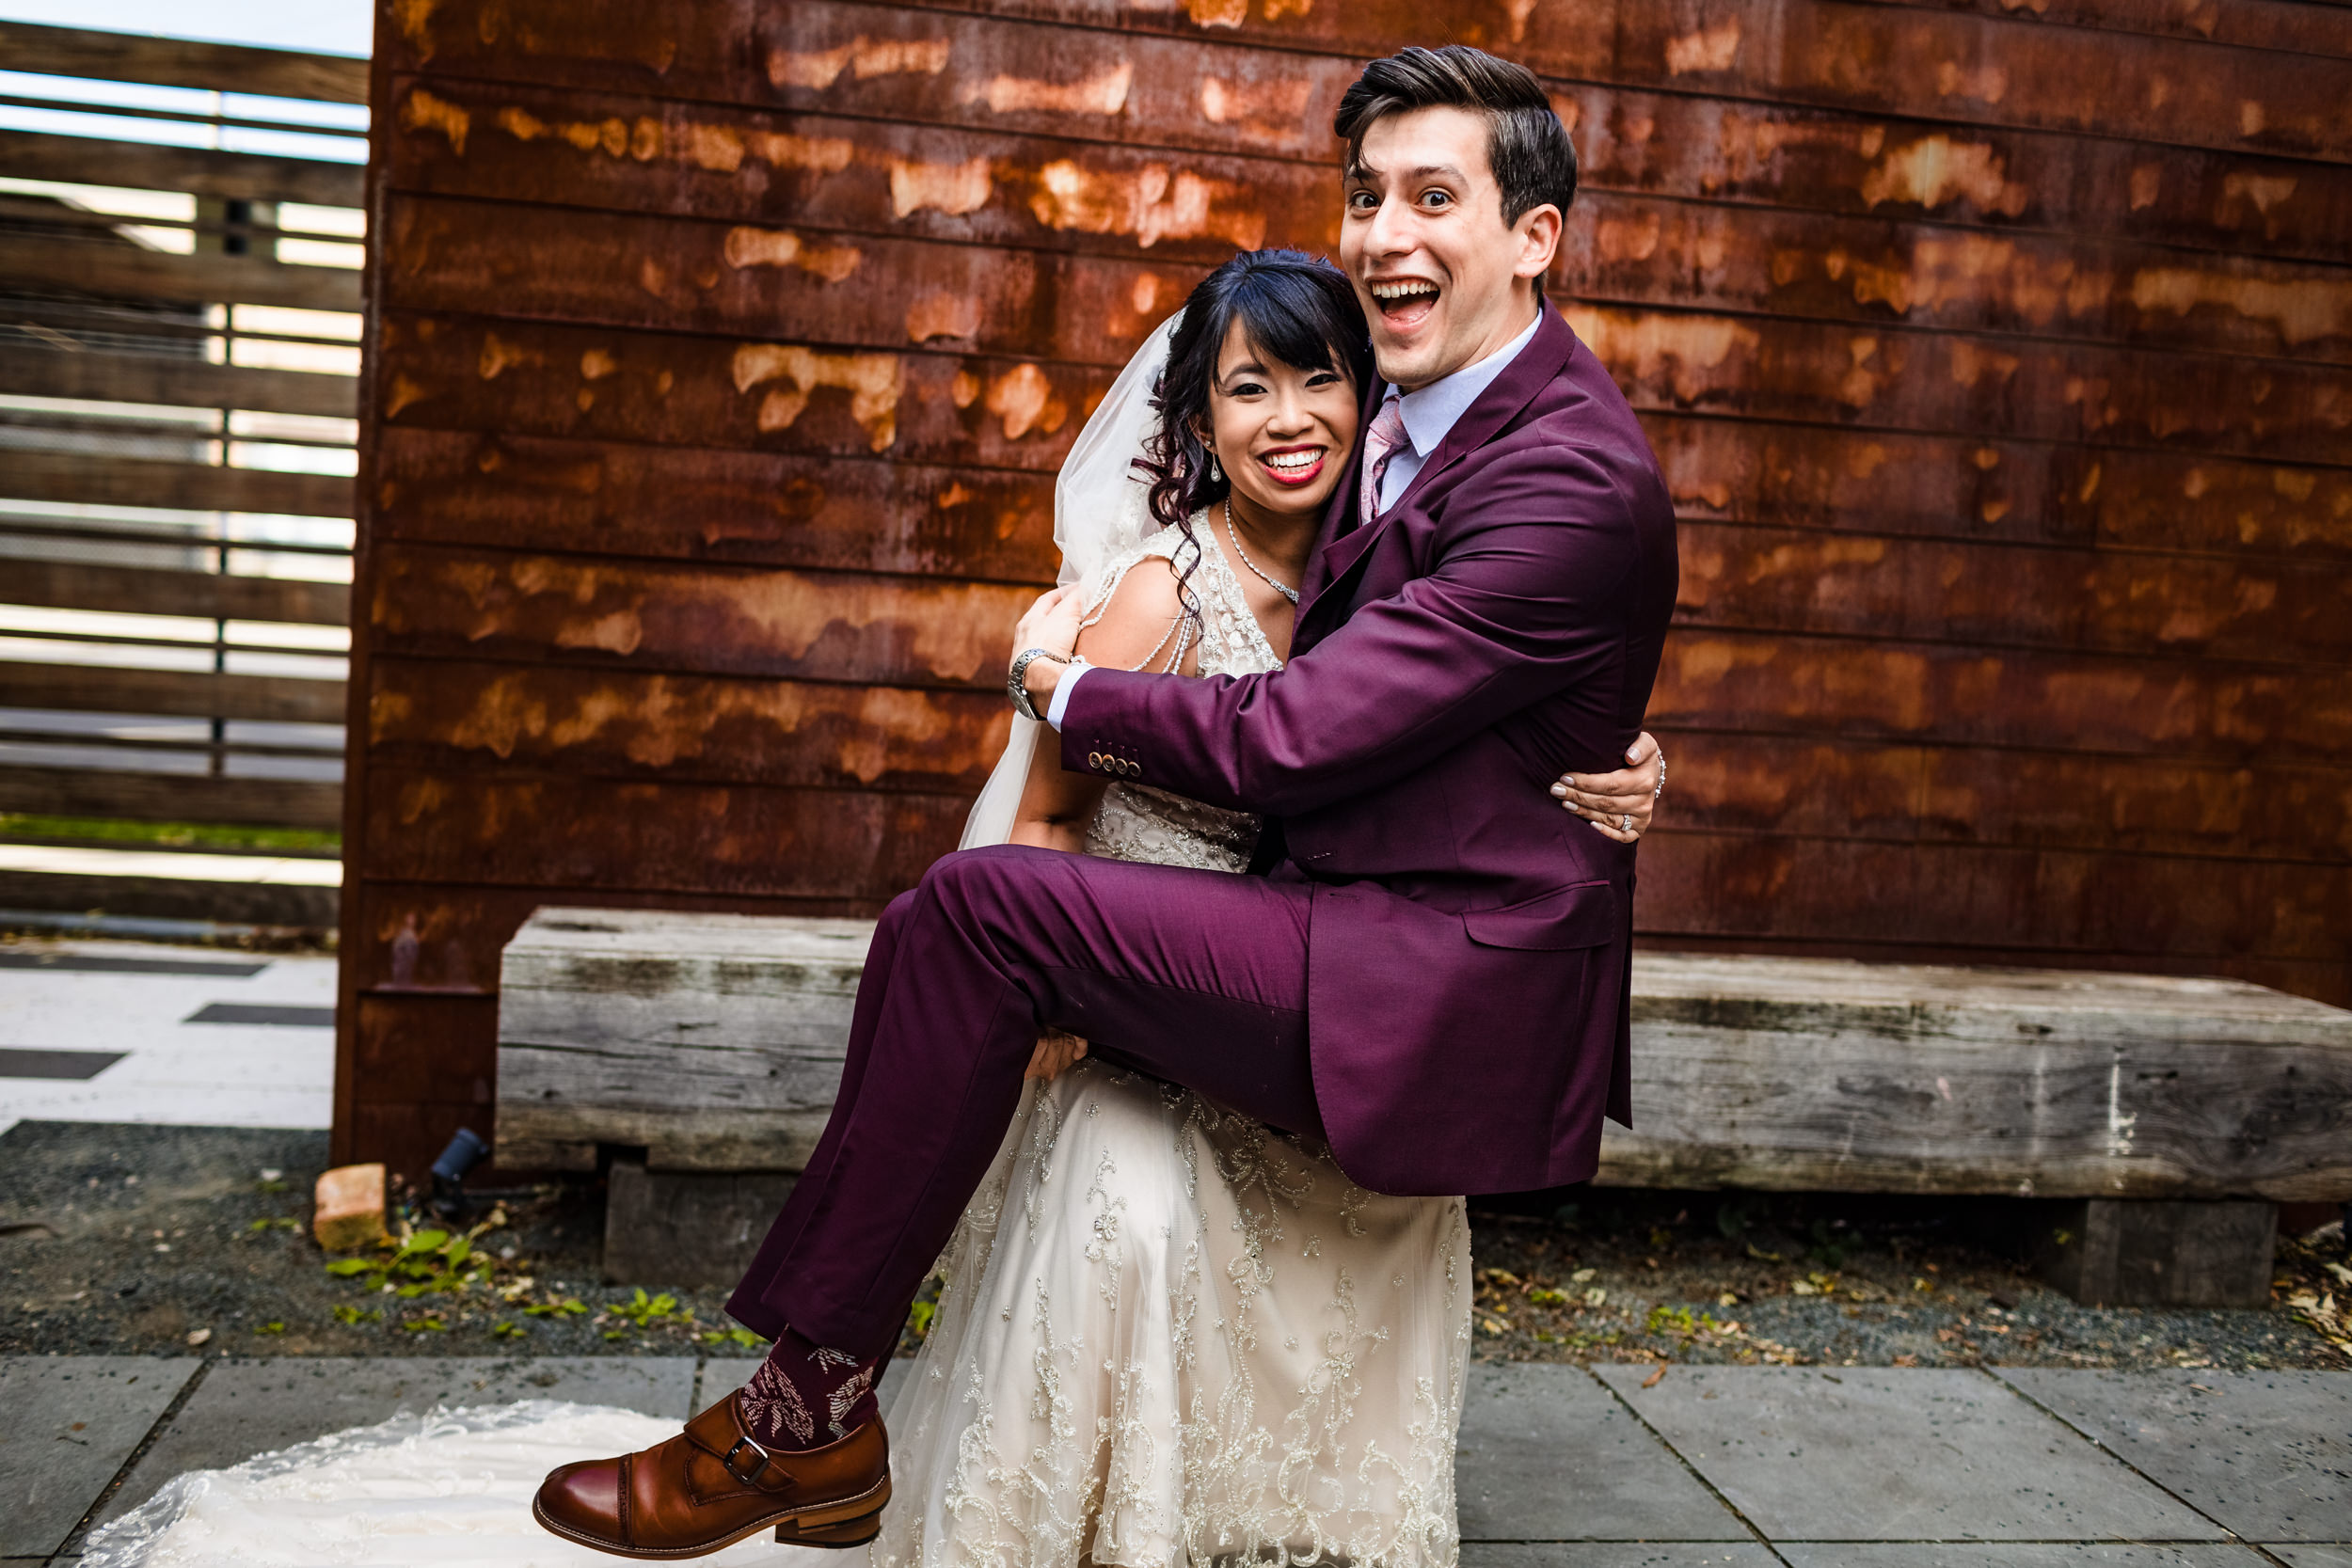 A bride carries her groom during a wedding ceremony at The Joinery.